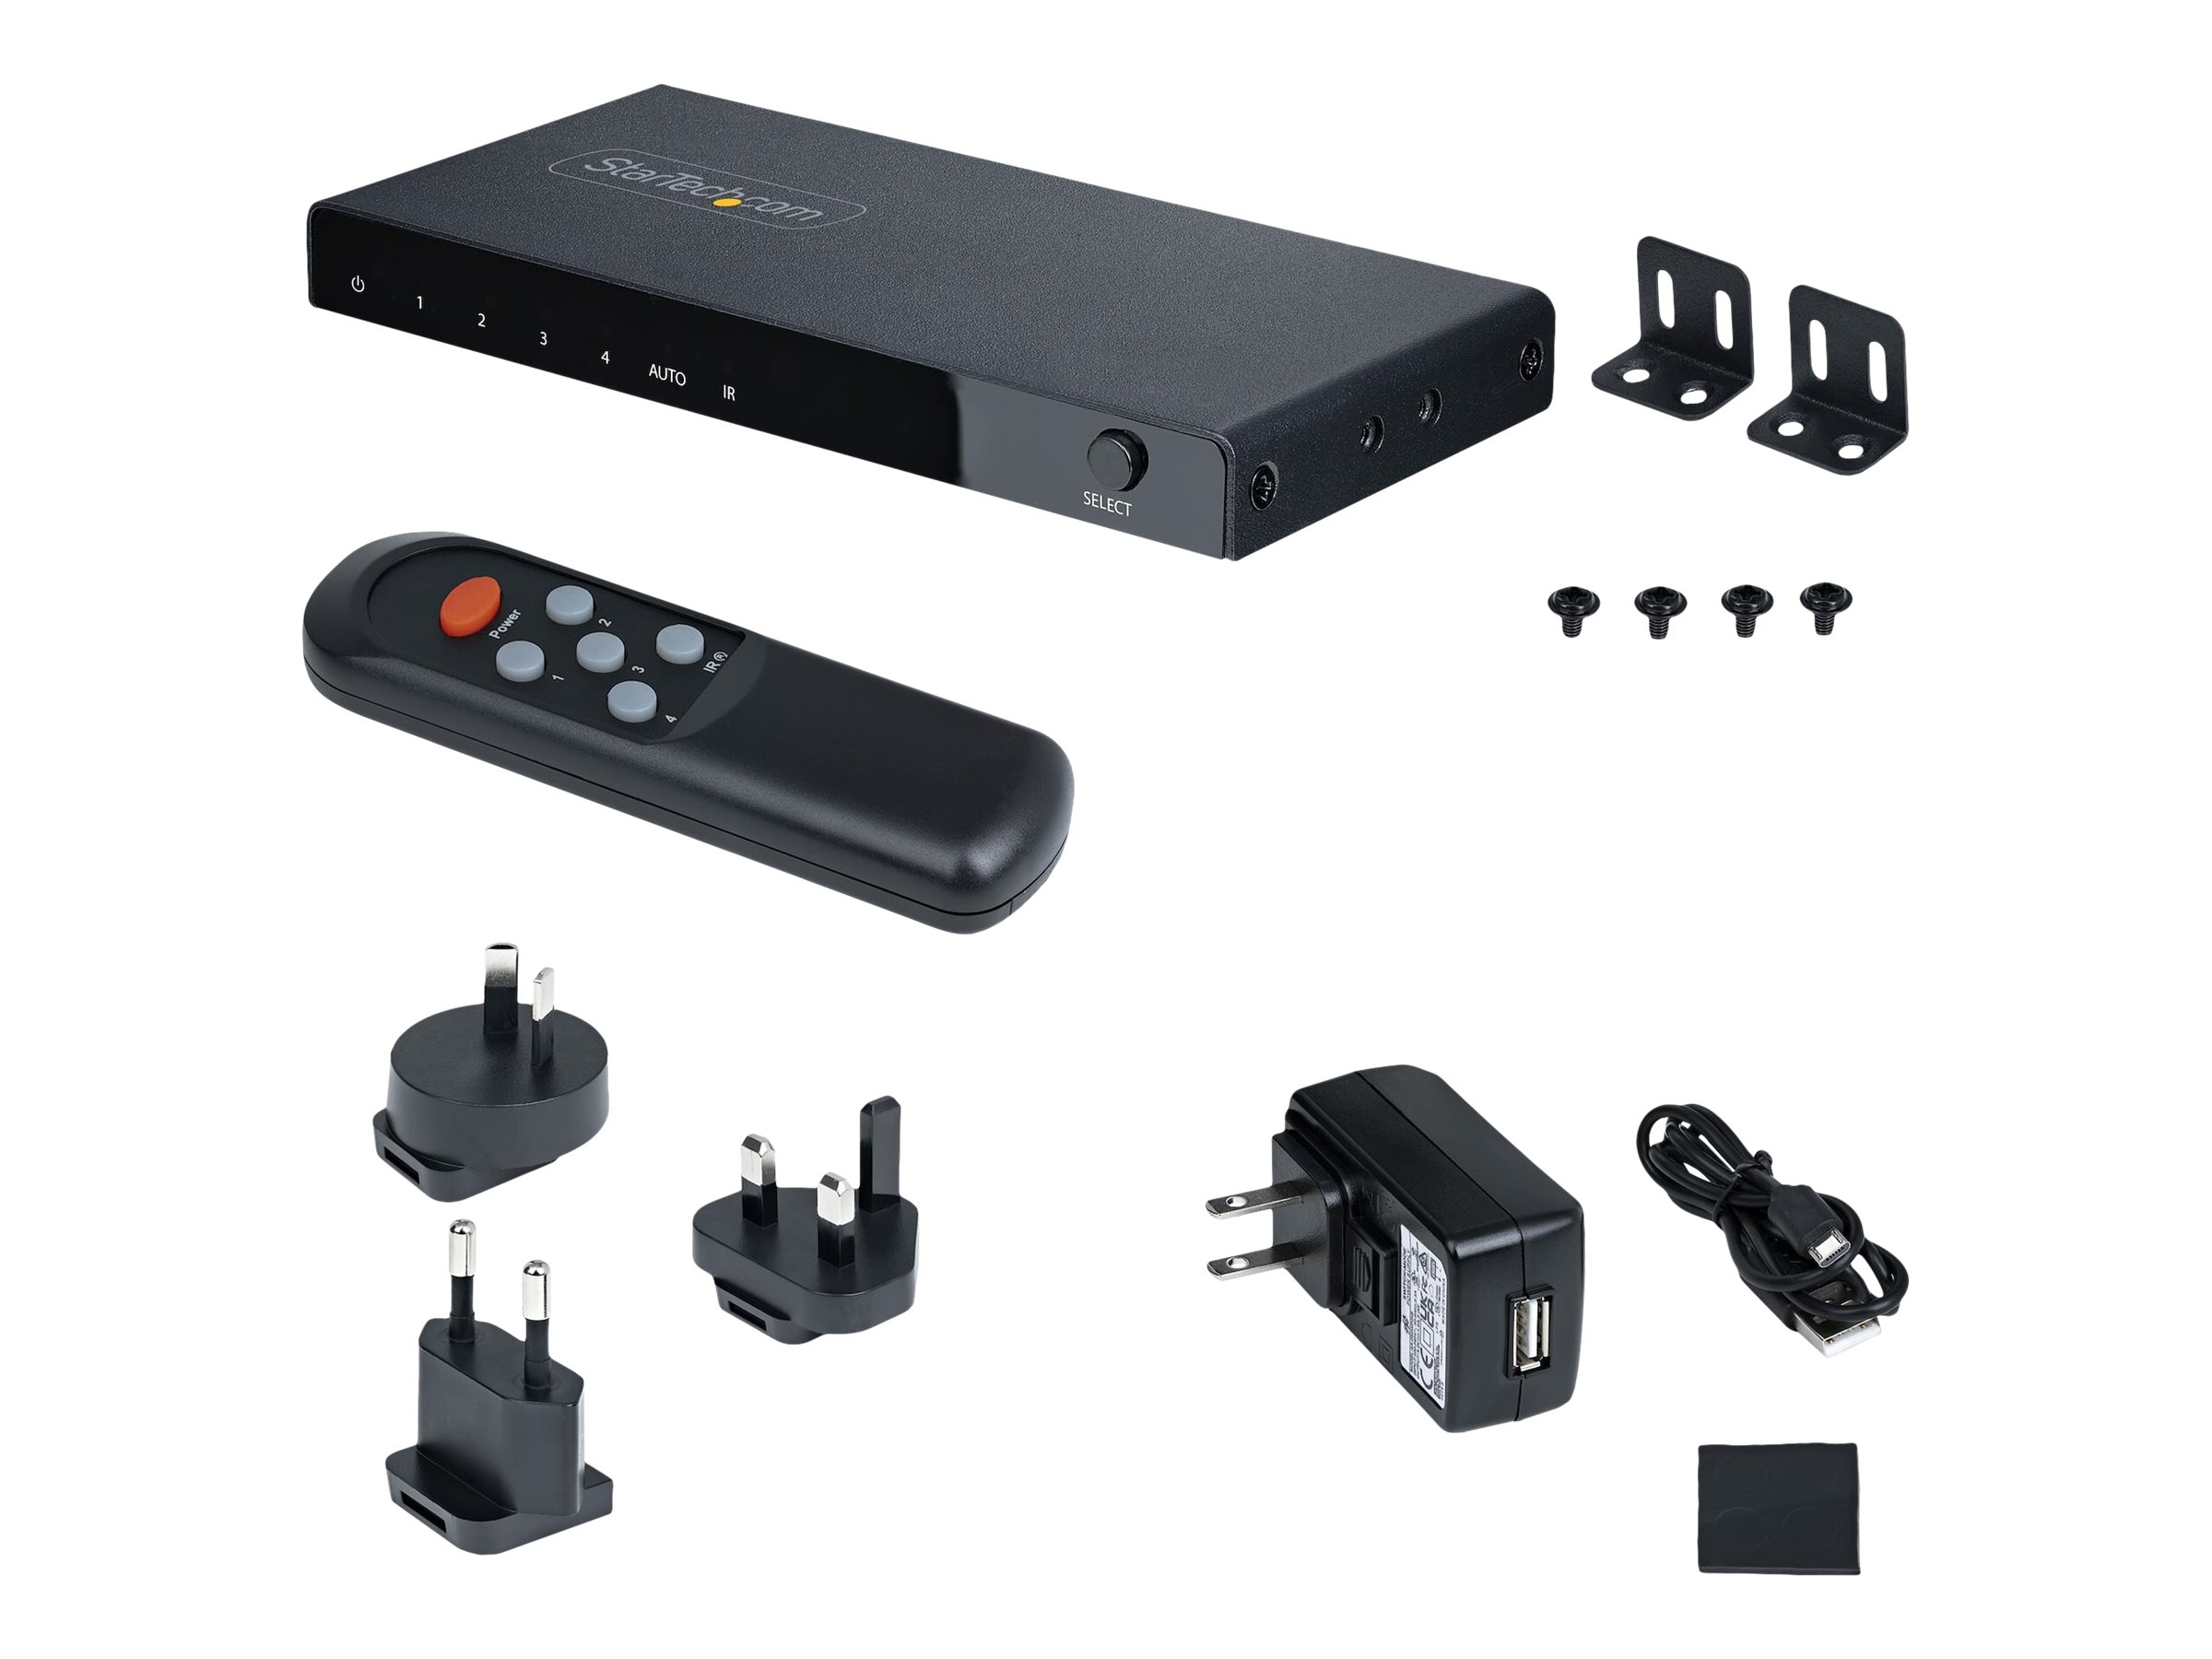 StarTech.com 8K HDMI Switch, HDMI Switcher 4K 120Hz HDR10&#x2B;, 8K 60Hz UHD, HDMI Switch 4 In 1 Out, Auto/Manual Source Switching, Remote Control and Adapter Included | www.shidirect.com